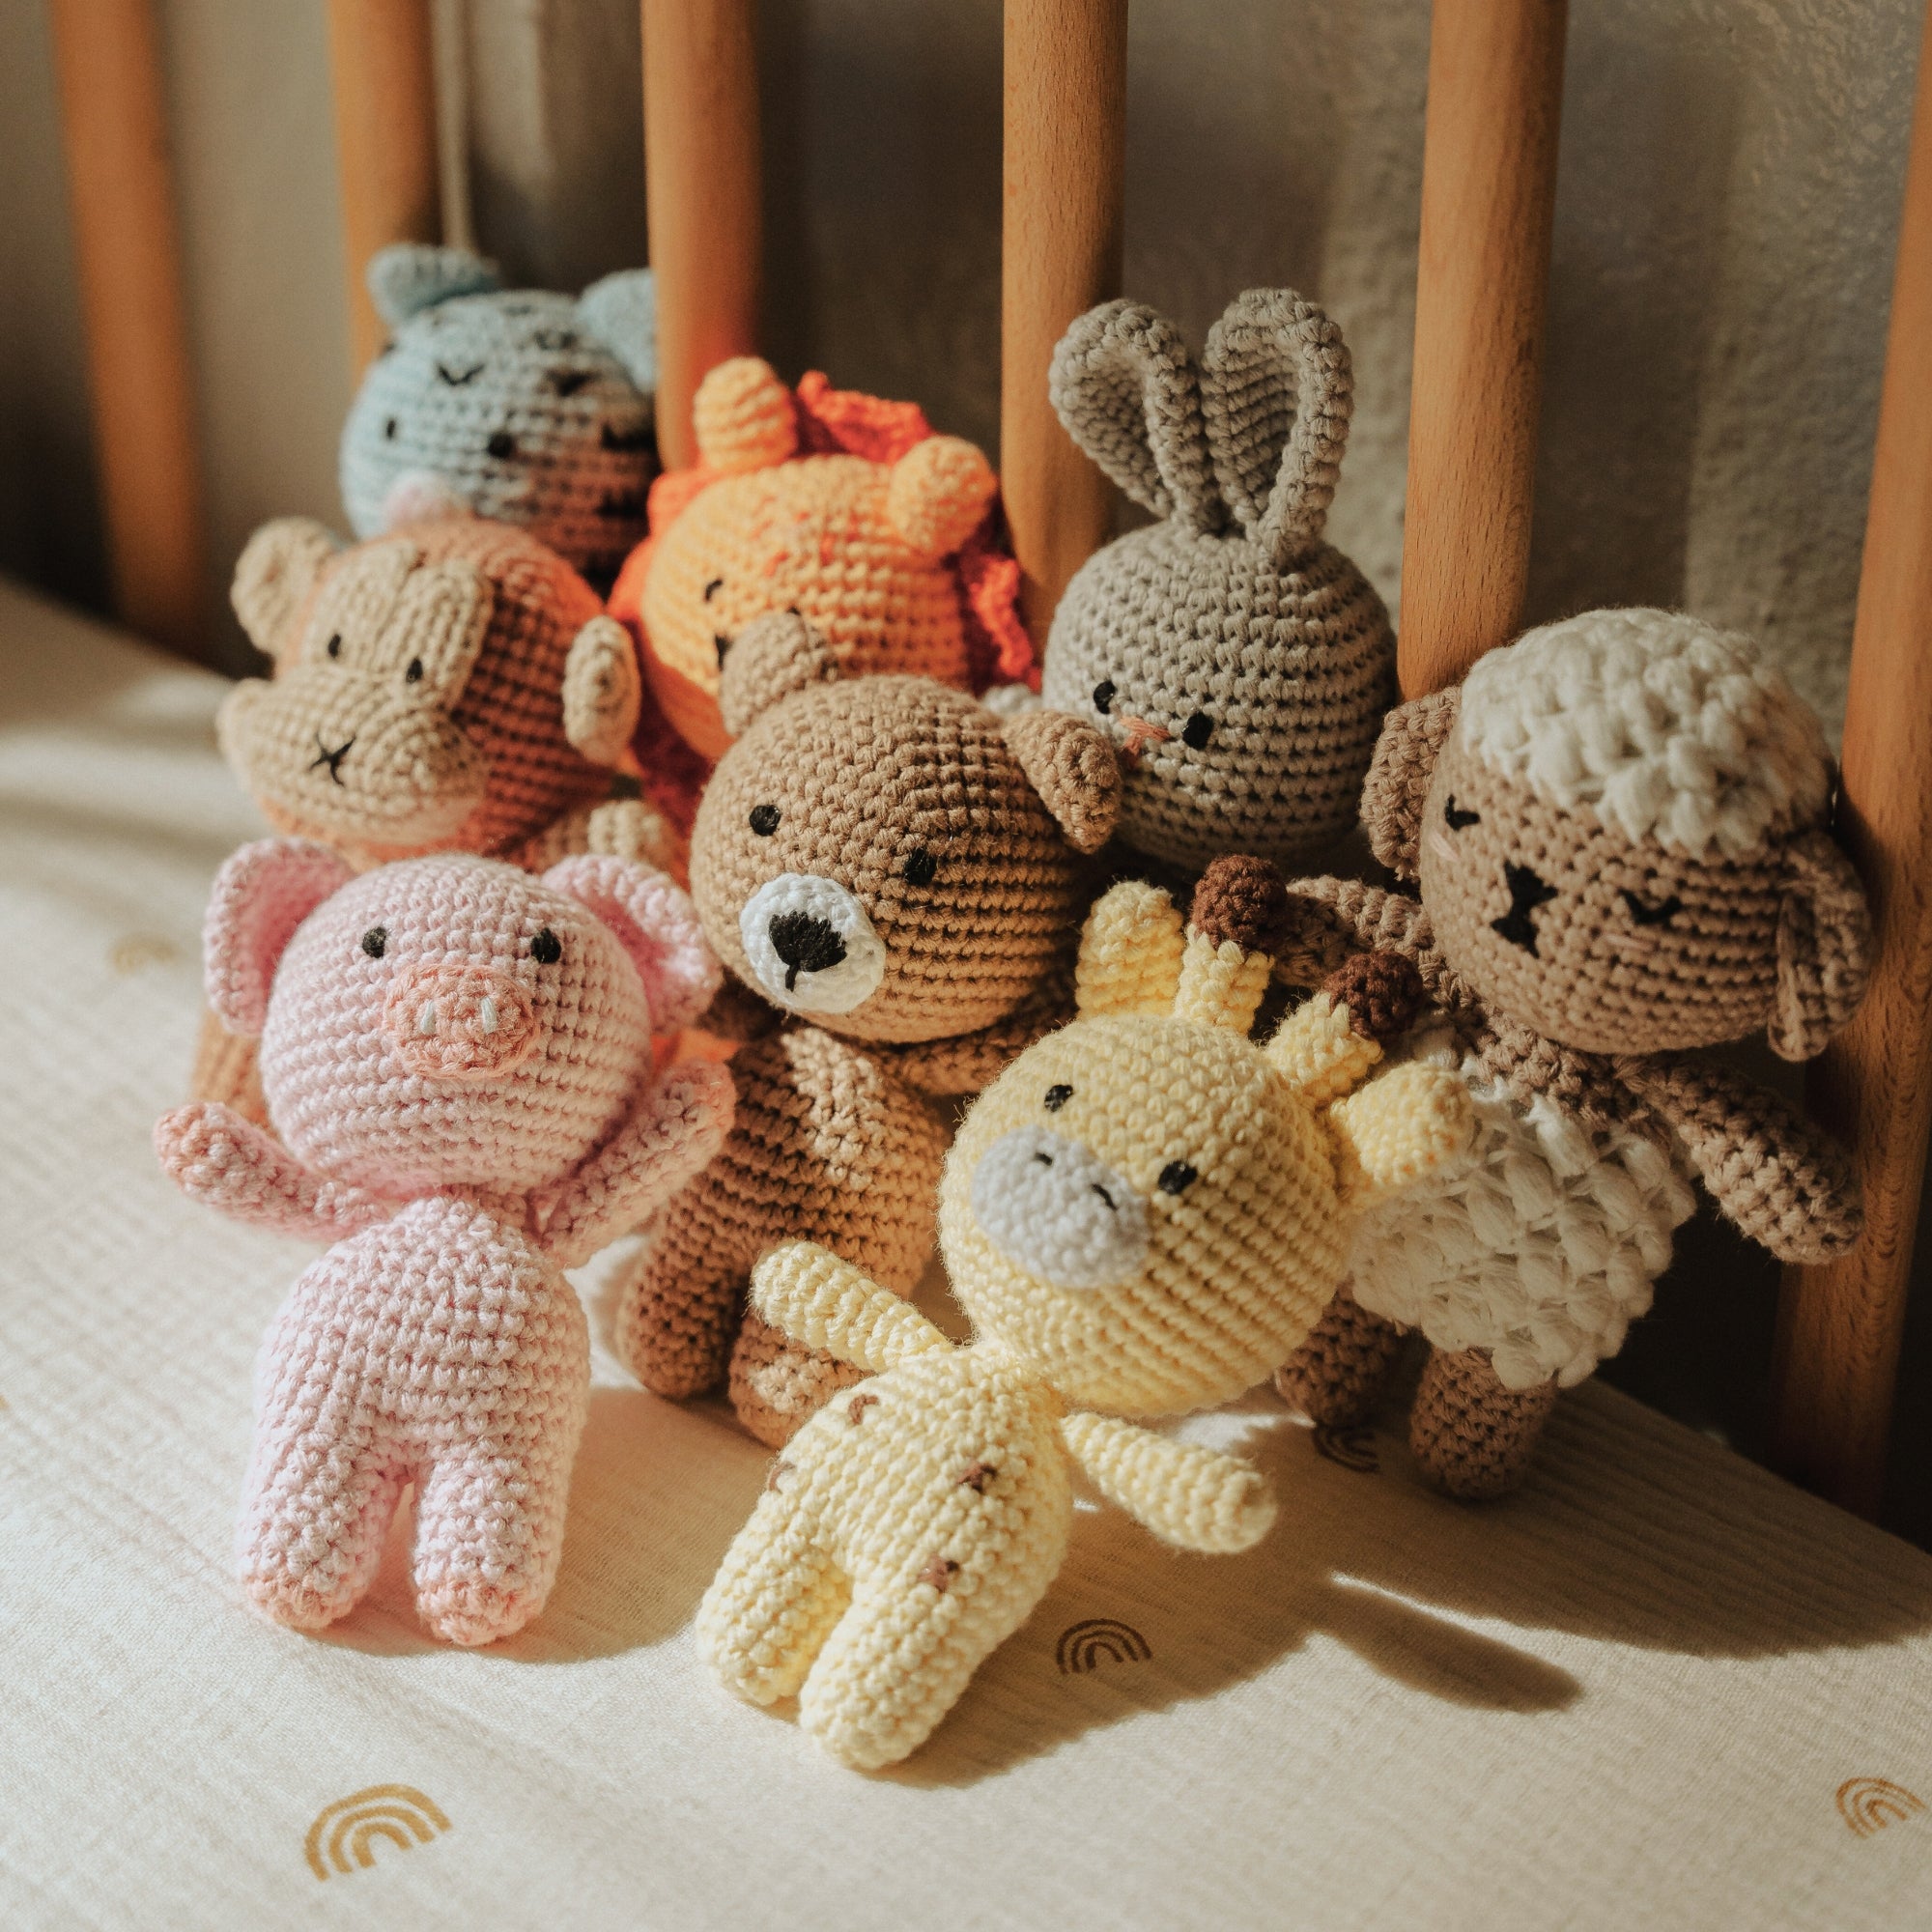 The Bitsy Zoo - Collection of 8 Crochet Stuffed Animals